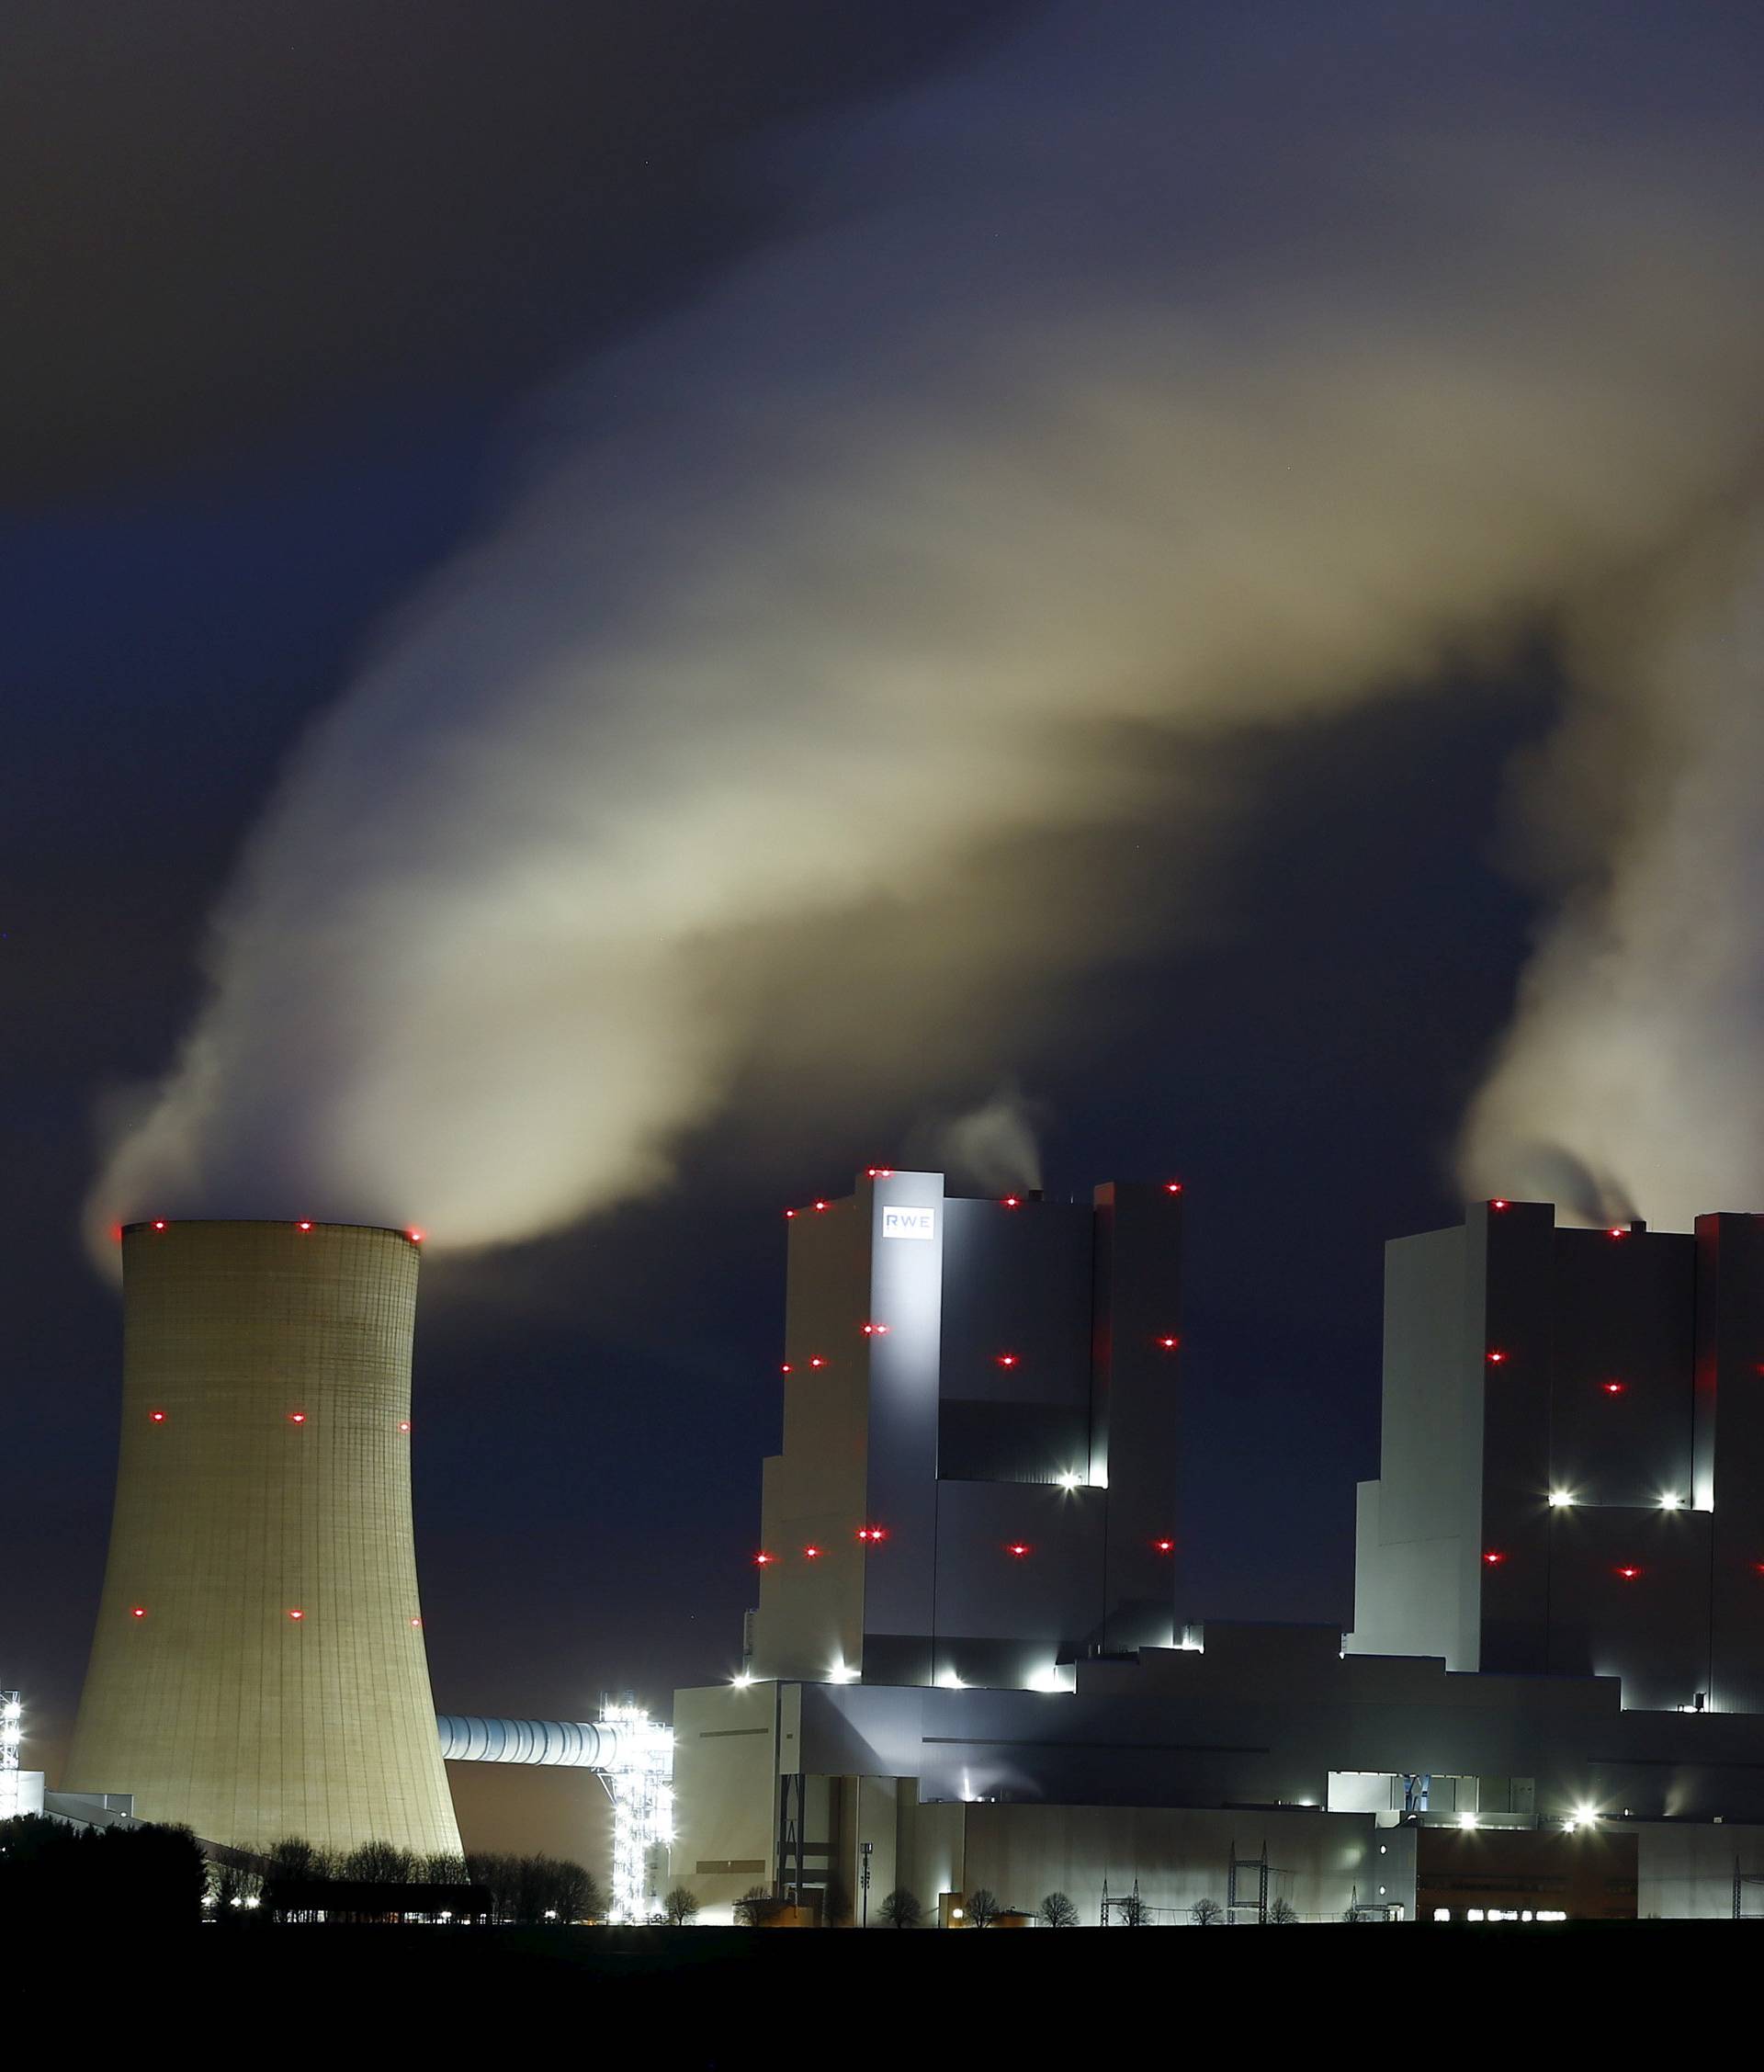 Steam rises from the chimneys of the coal power plant of RWE in Neurath